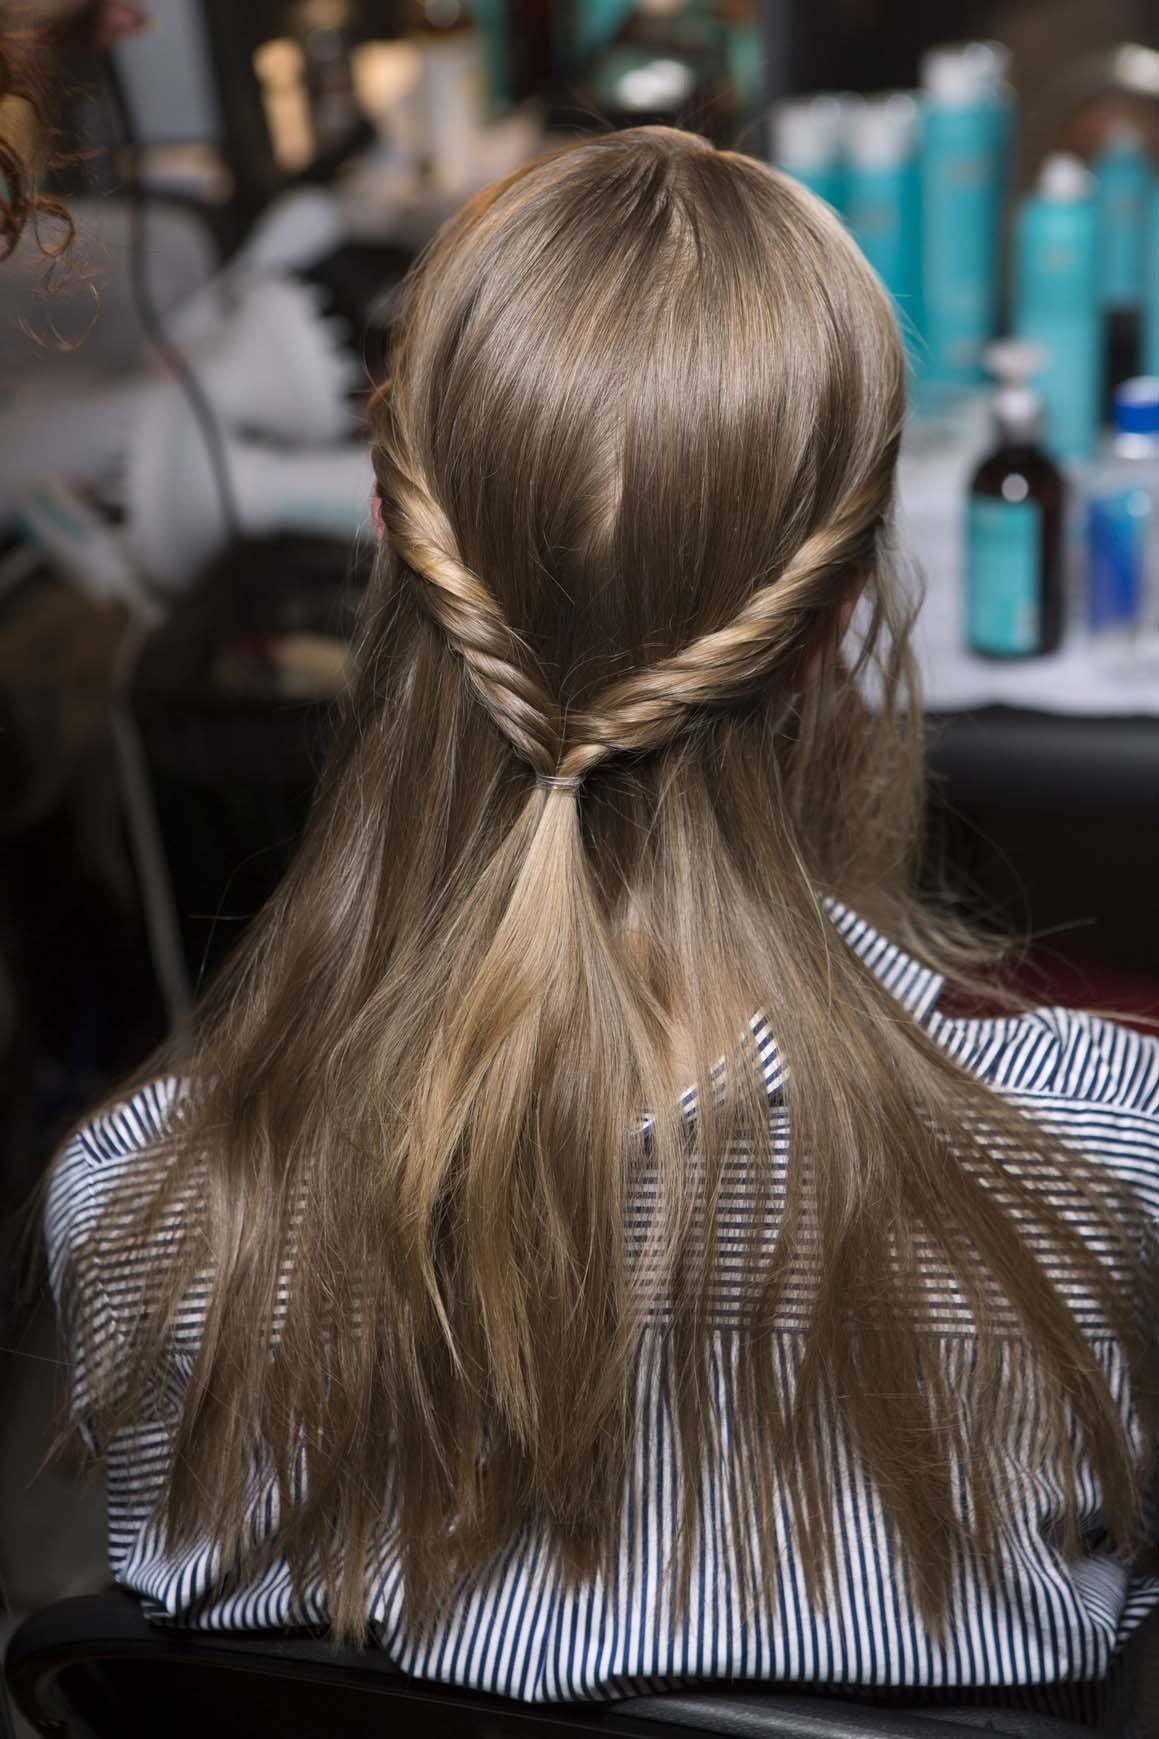 11 Twist Hairstyles to Switch Up Your Braid Game - Brit + Co